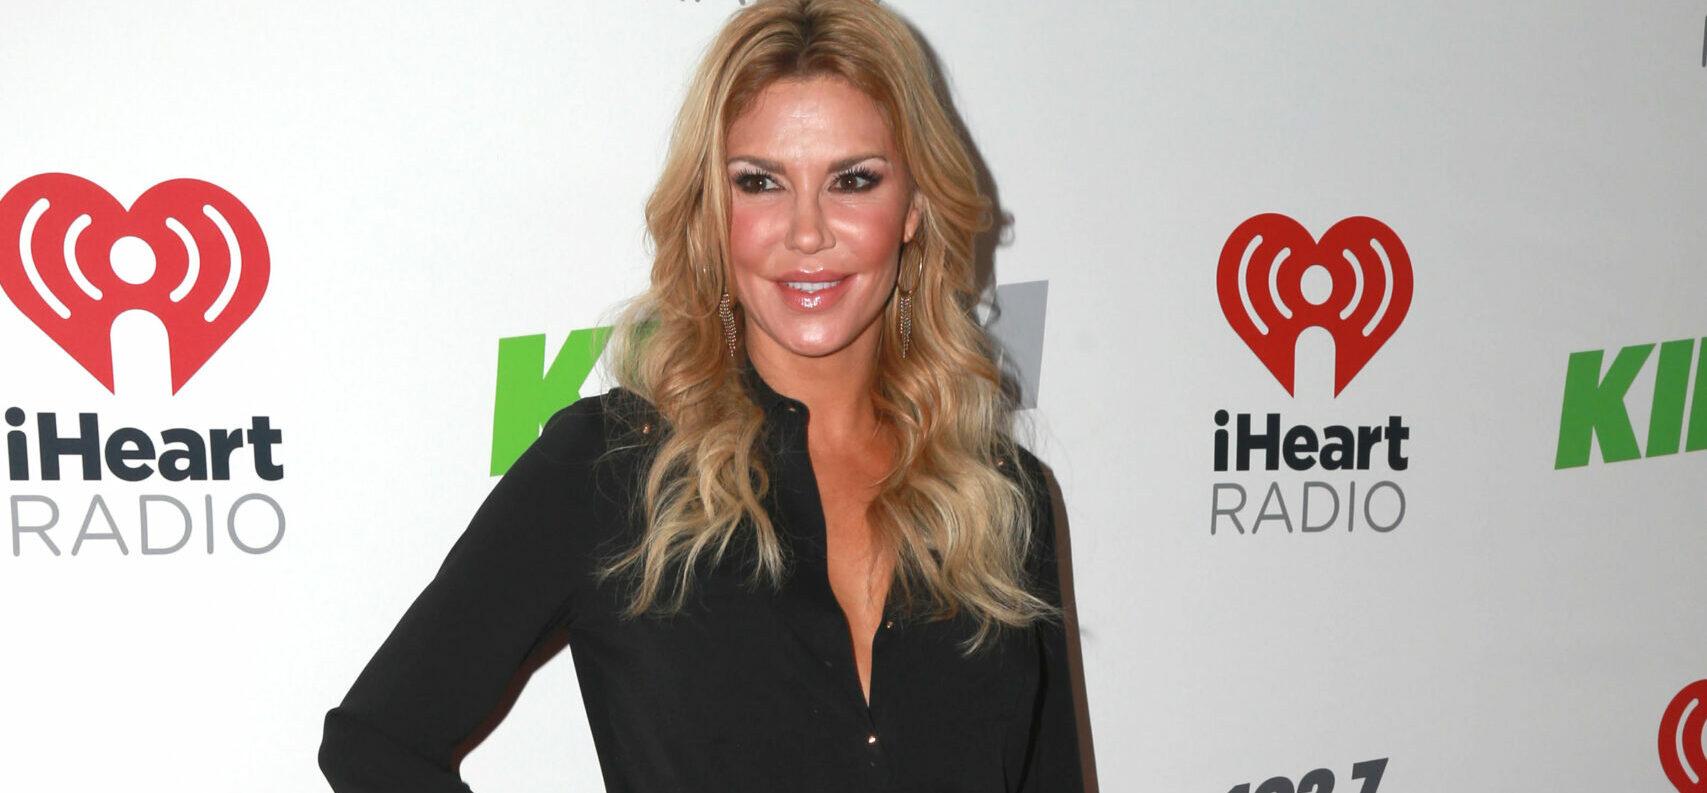 'RHOBH' Star Brandi Glanville Hospitalized With Mysterious Infection